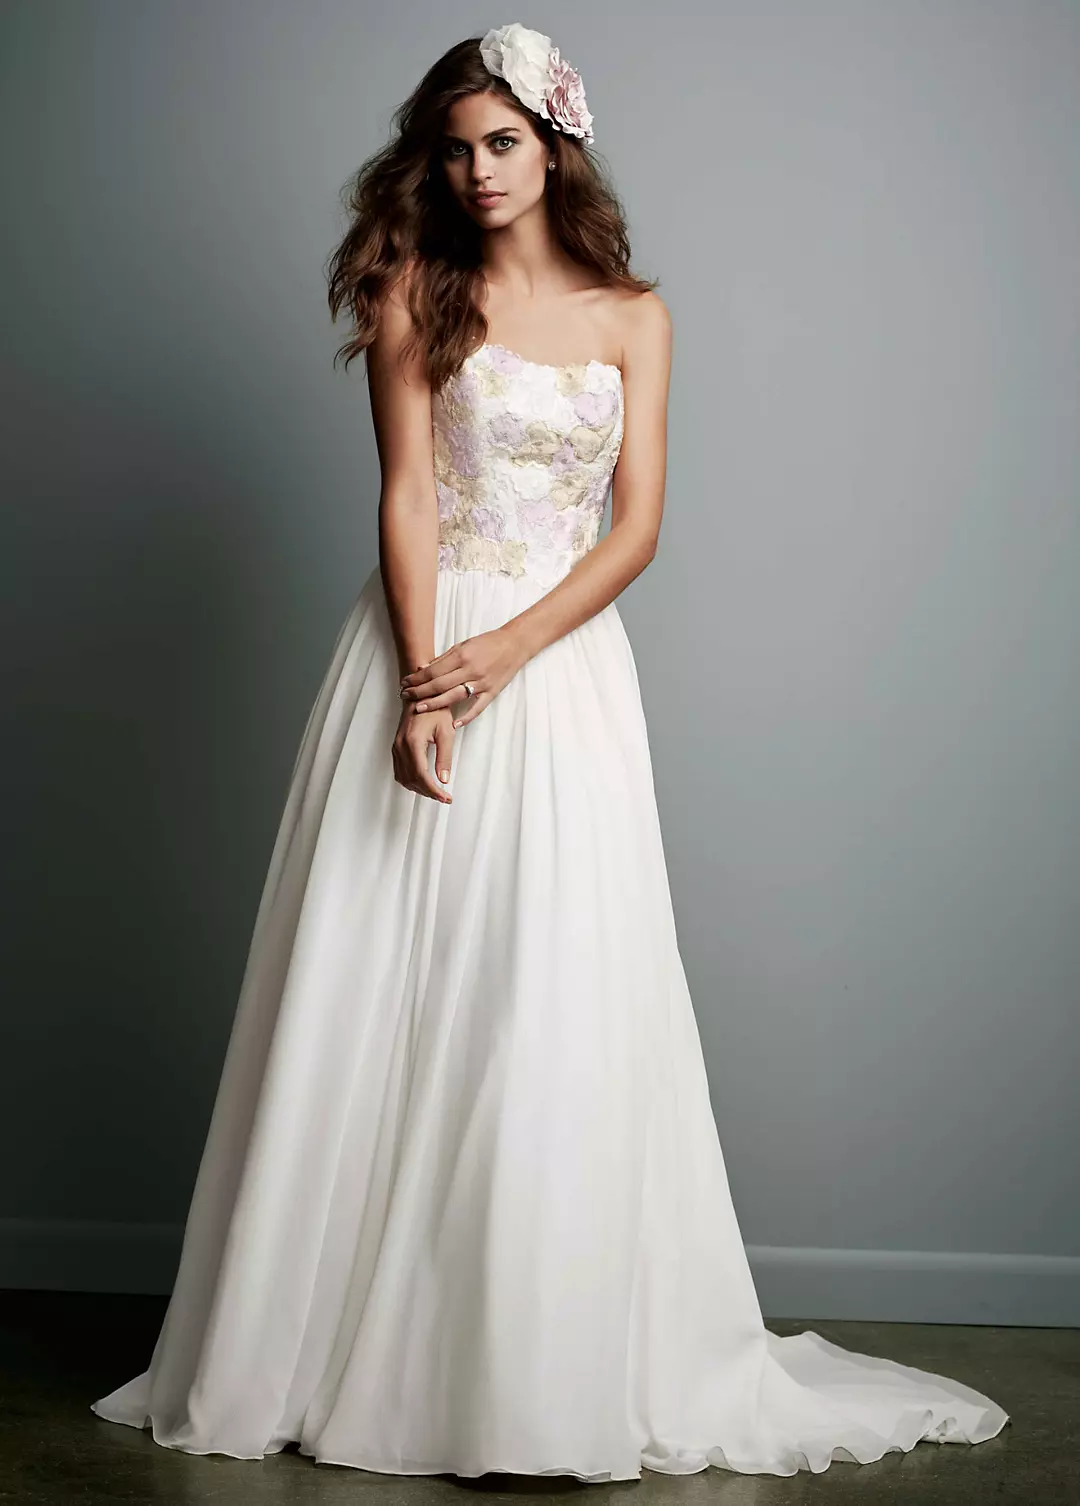 Strapless Chiffon Ball Gown with Watercolor Lace Image